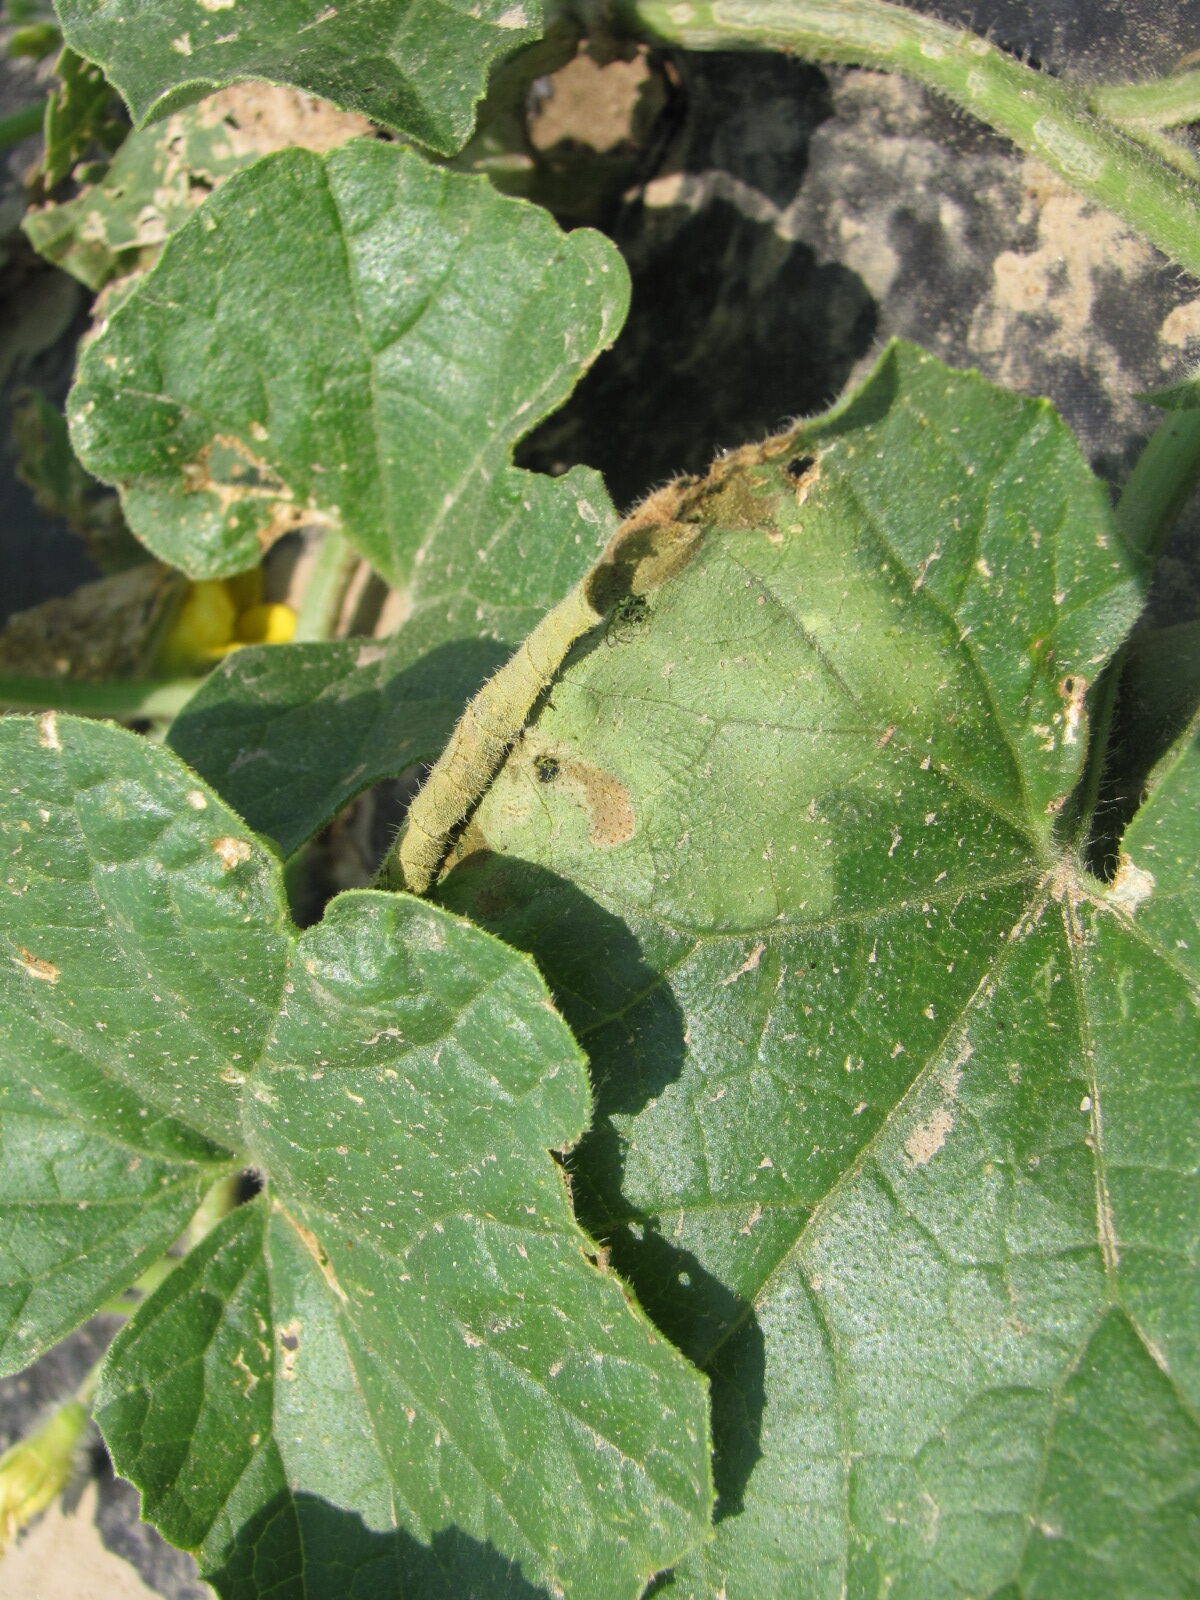 Figure 1. The wilted and collapsed area on the margin of this leaf is due to bacterial wilt of cantaloupe.